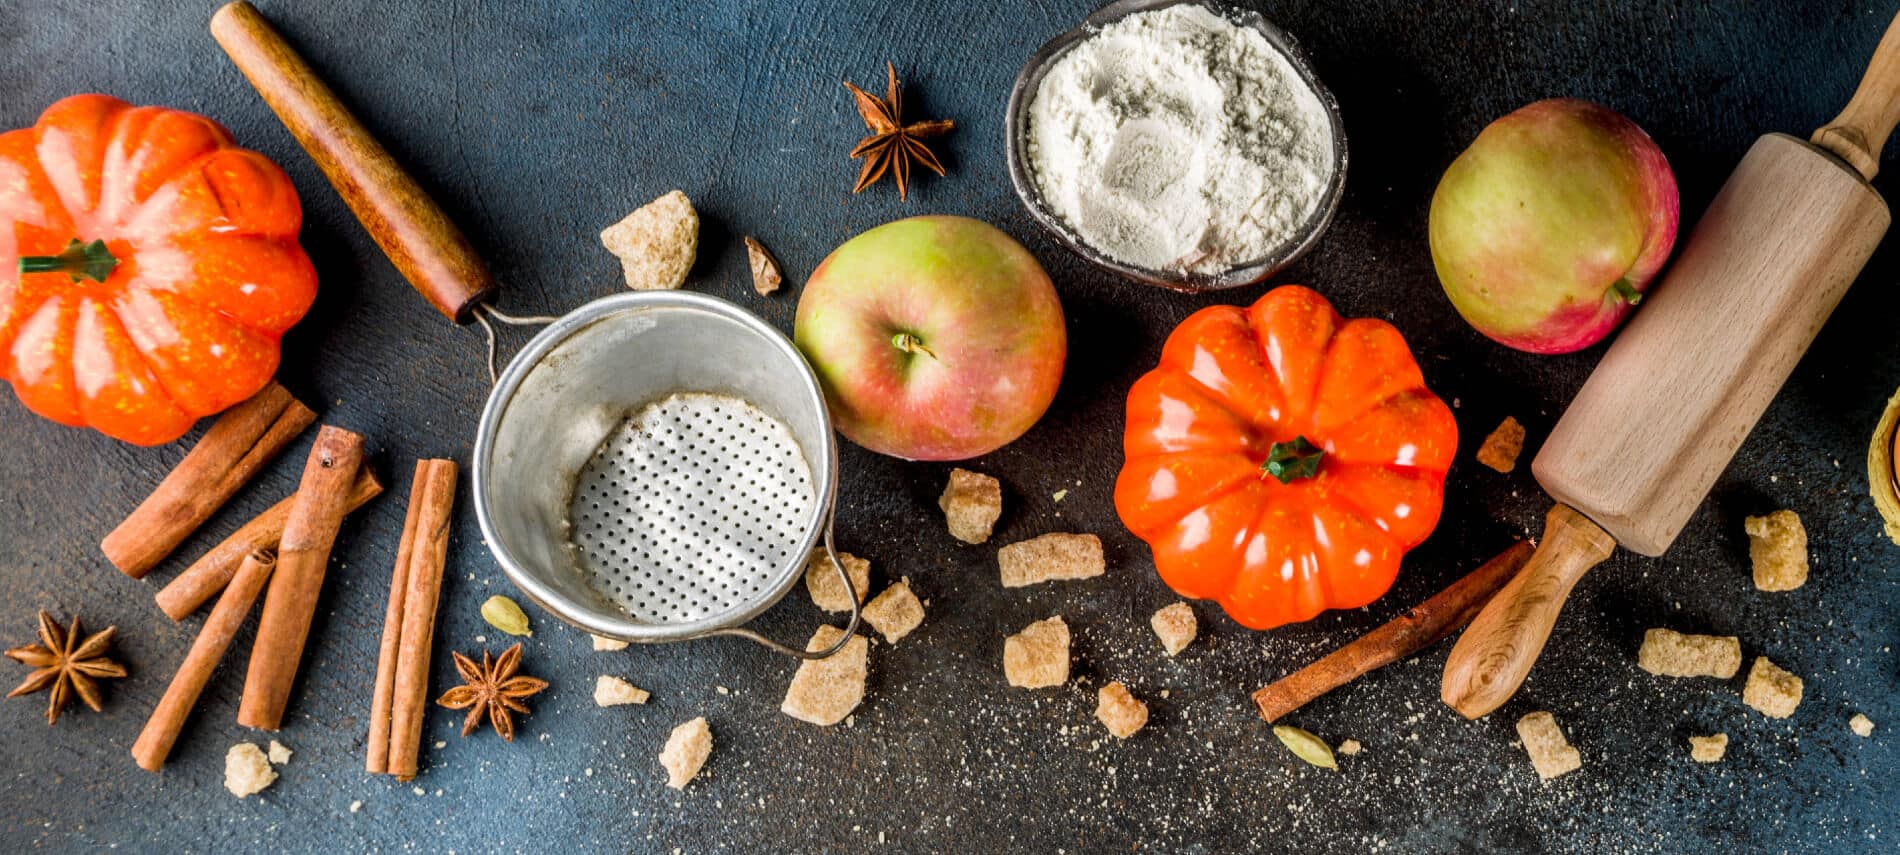 Fall Baking ingredients of apples, pumpkins, flour, and spices